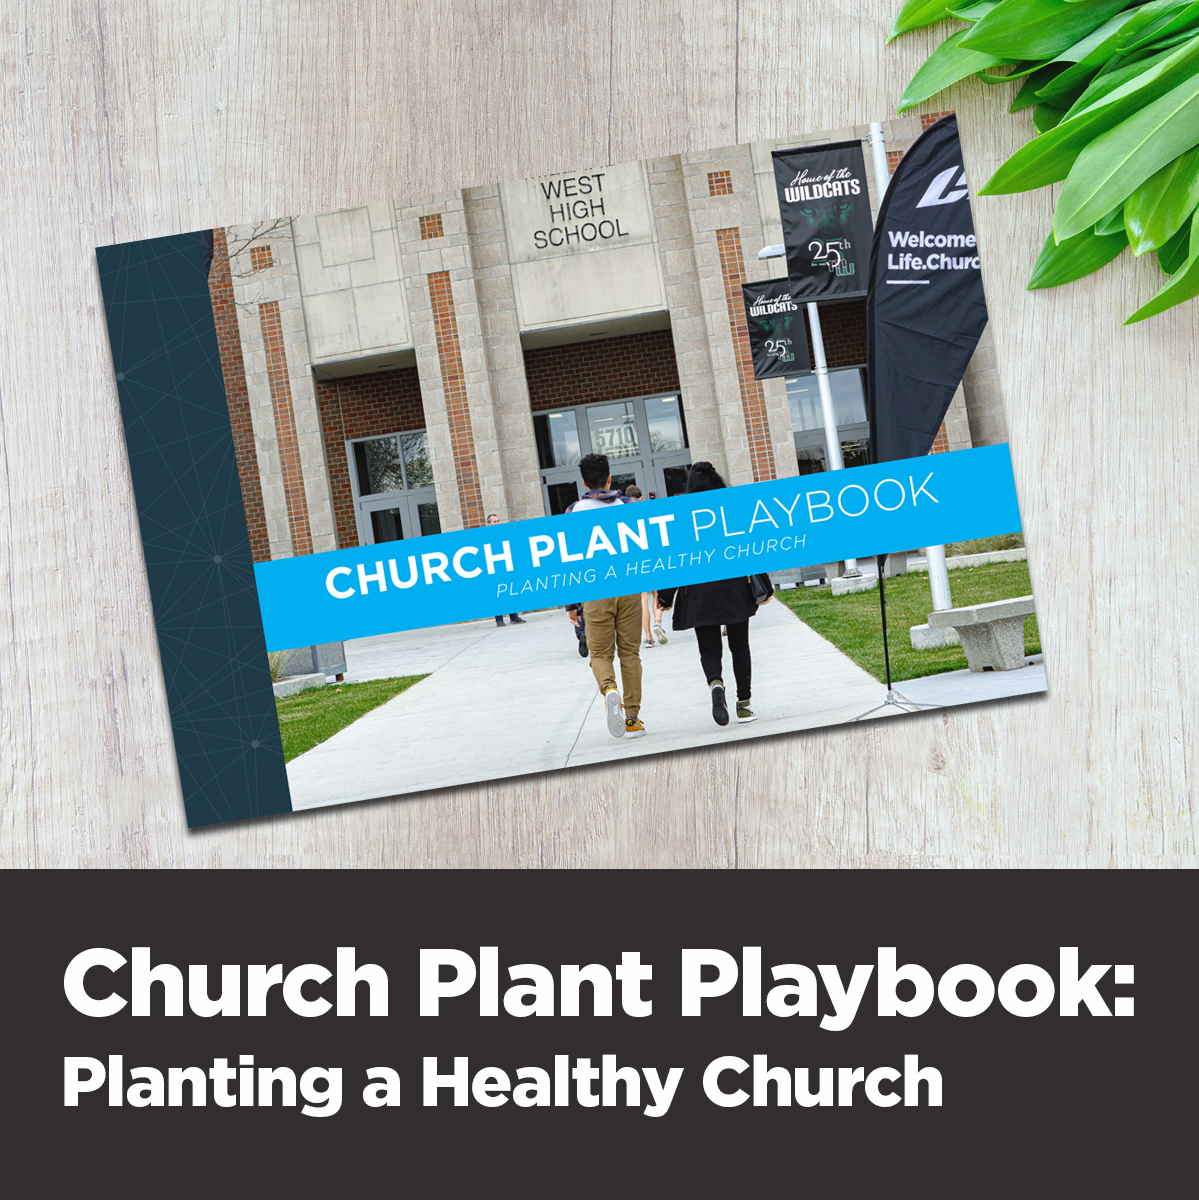 Church Plant Playbook  Operations  Free Church Resources from  With Church Plant Budget Template With Regard To Church Plant Budget Template